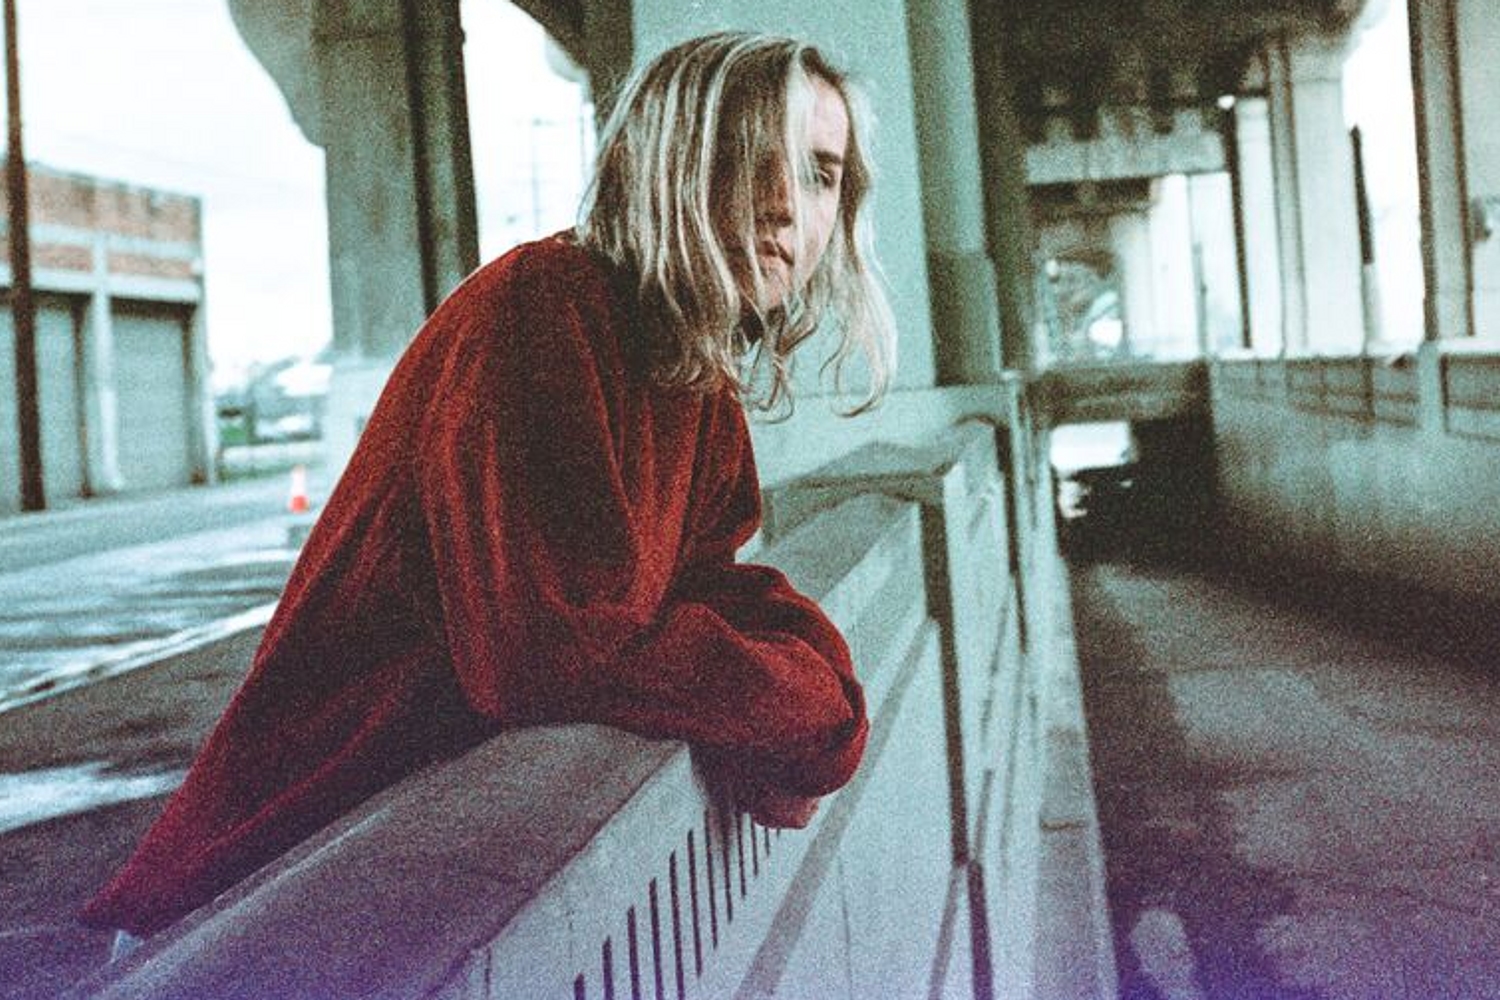 The Japanese House - Letter by the Water